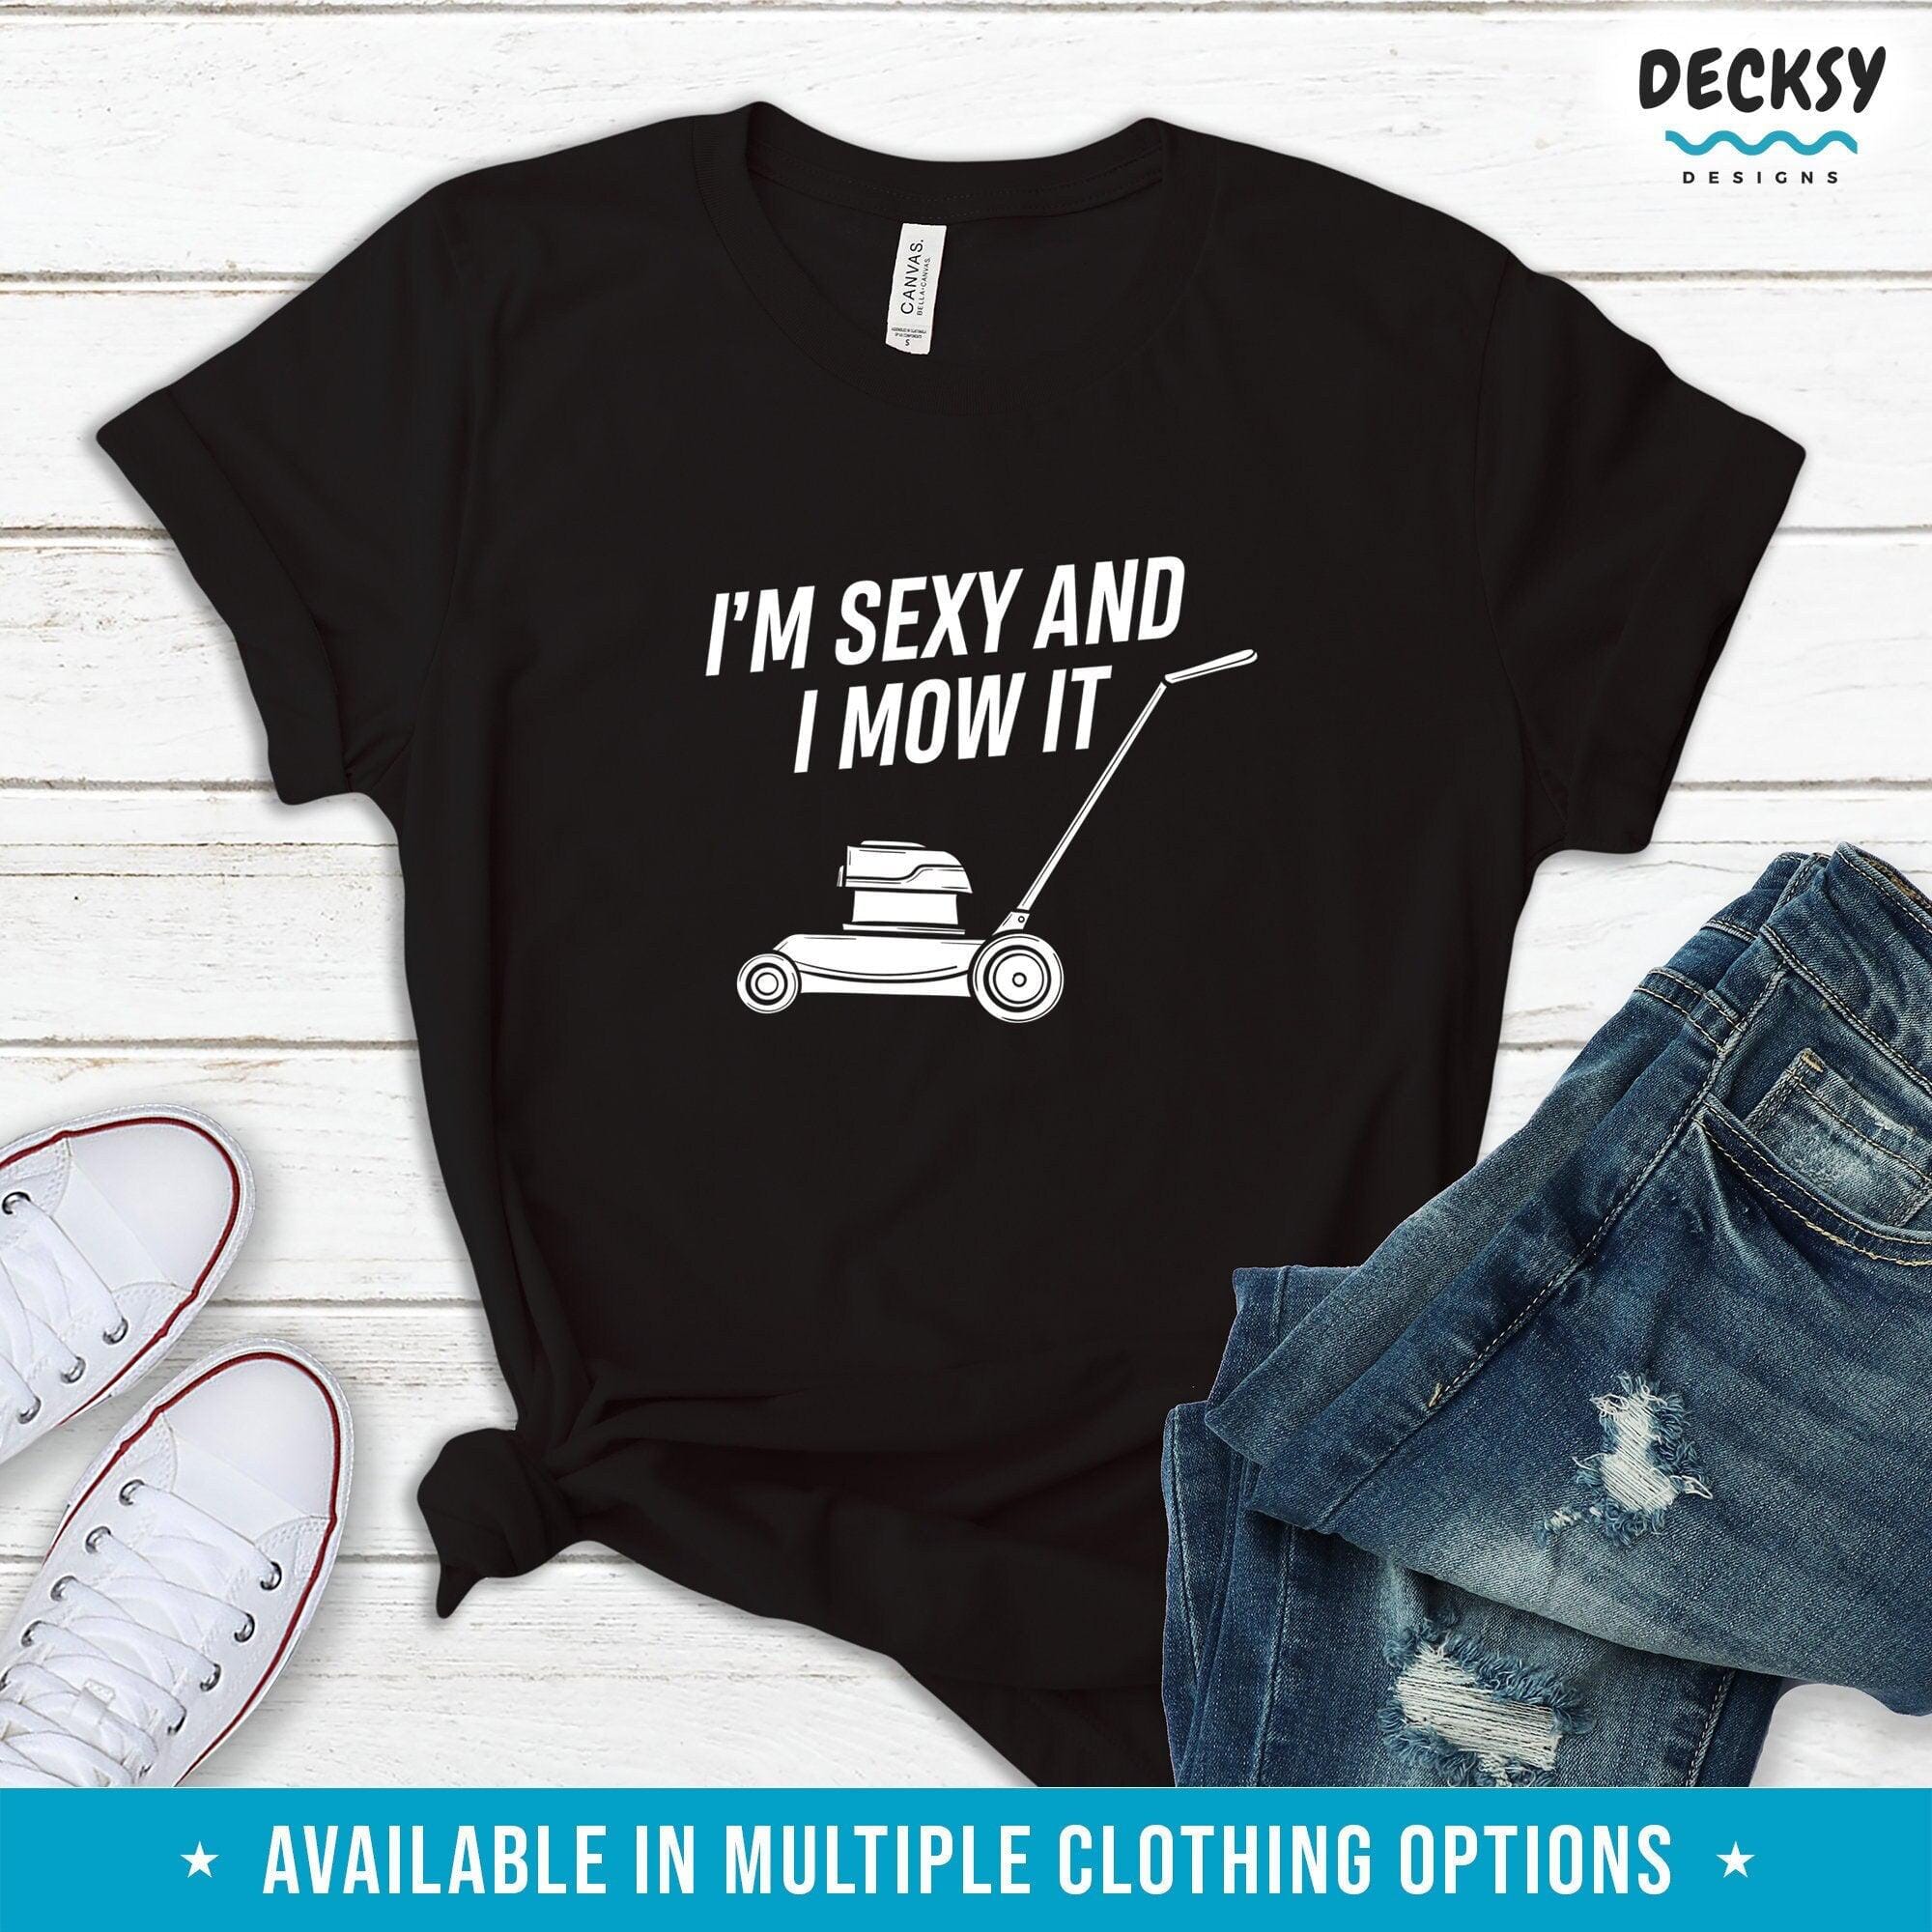 Mens Gardening Shirt, Lawn Mower Gift-Clothing:Gender-Neutral Adult Clothing:Tops & Tees:T-shirts:Graphic Tees-DecksyDesigns